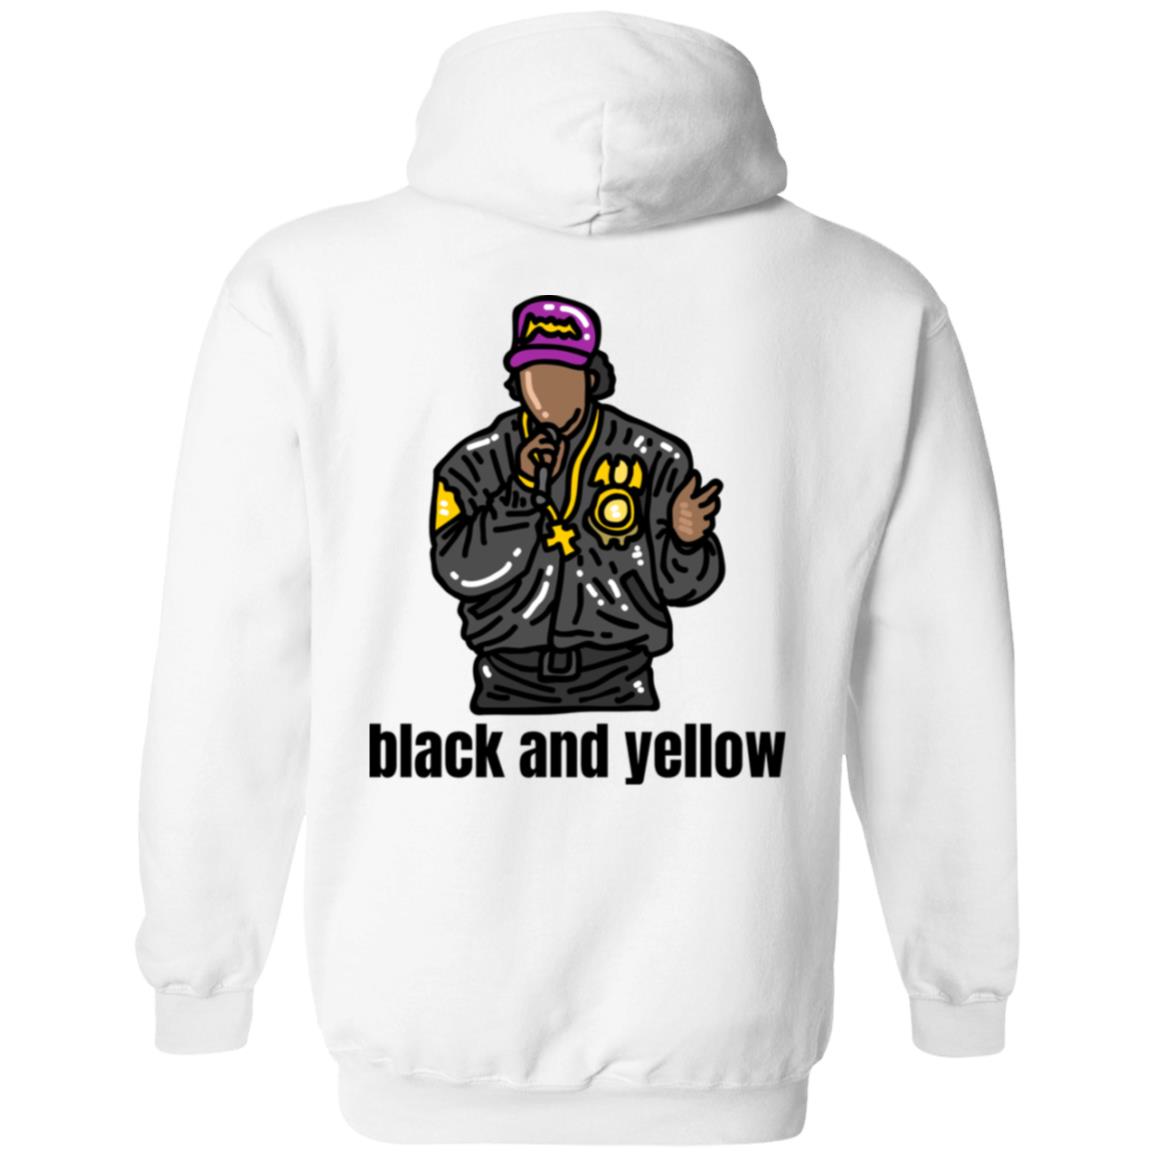 Black And Yellow Rapper Shirt